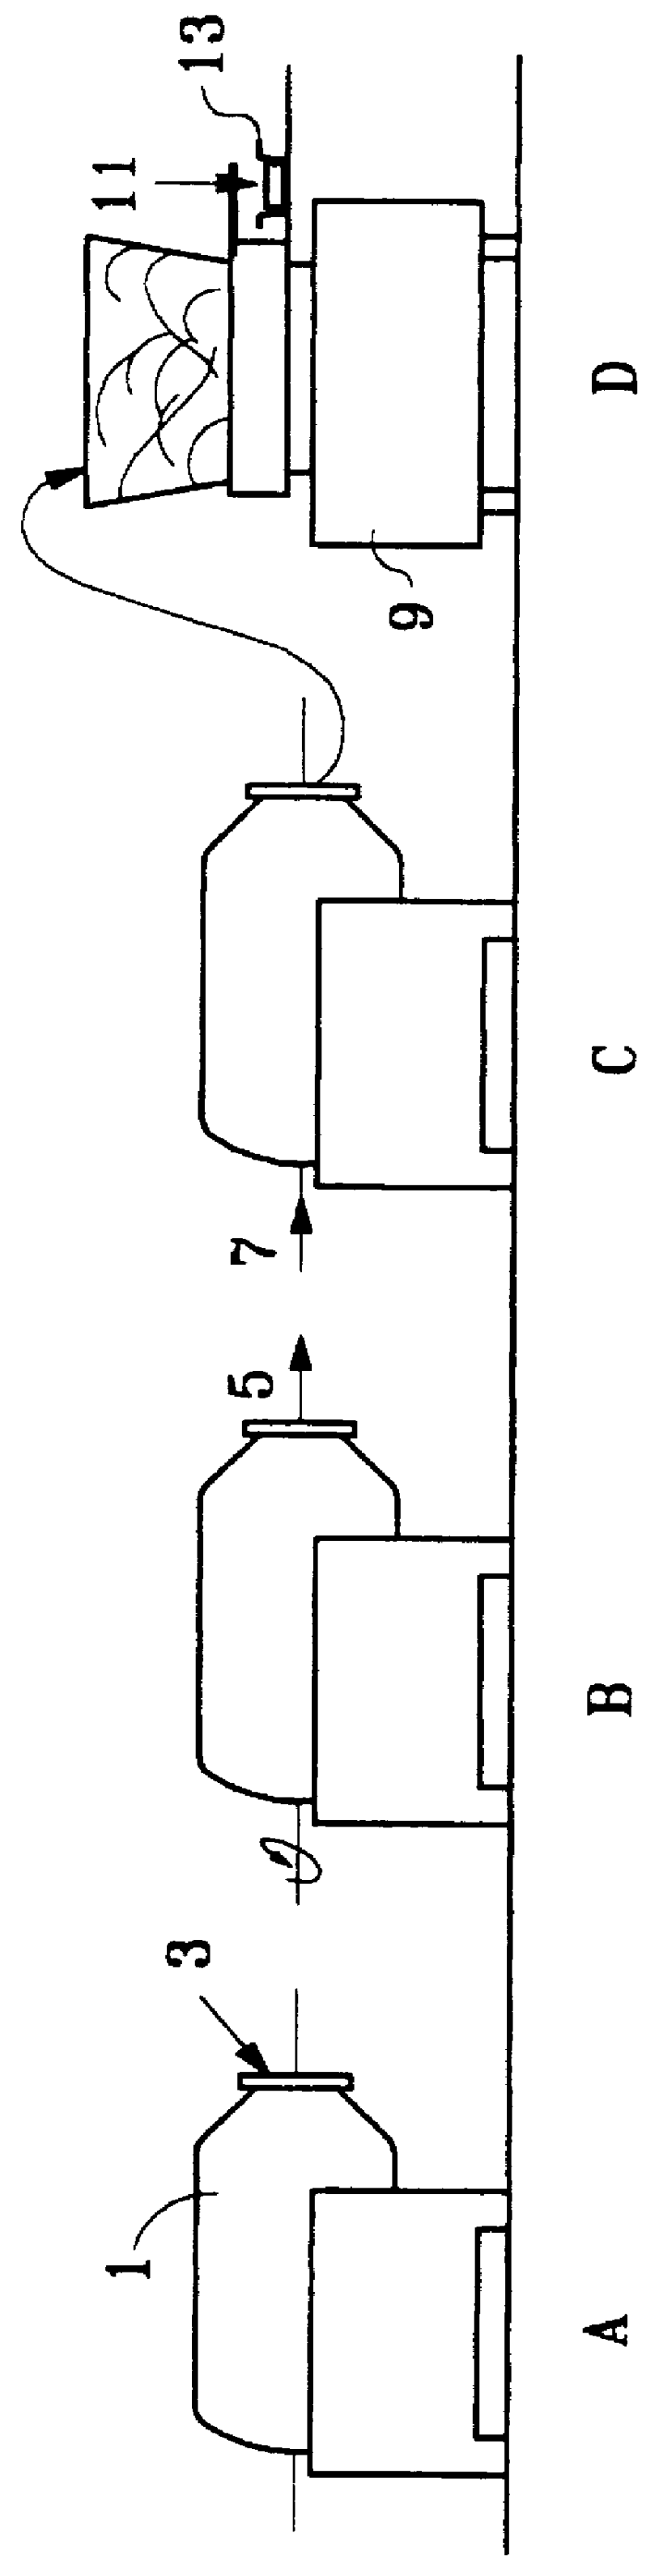 Method of measuring out and/or forming foodstuffs, foodstuffs obtained by said method, and packaging suitable for being implemented by said method